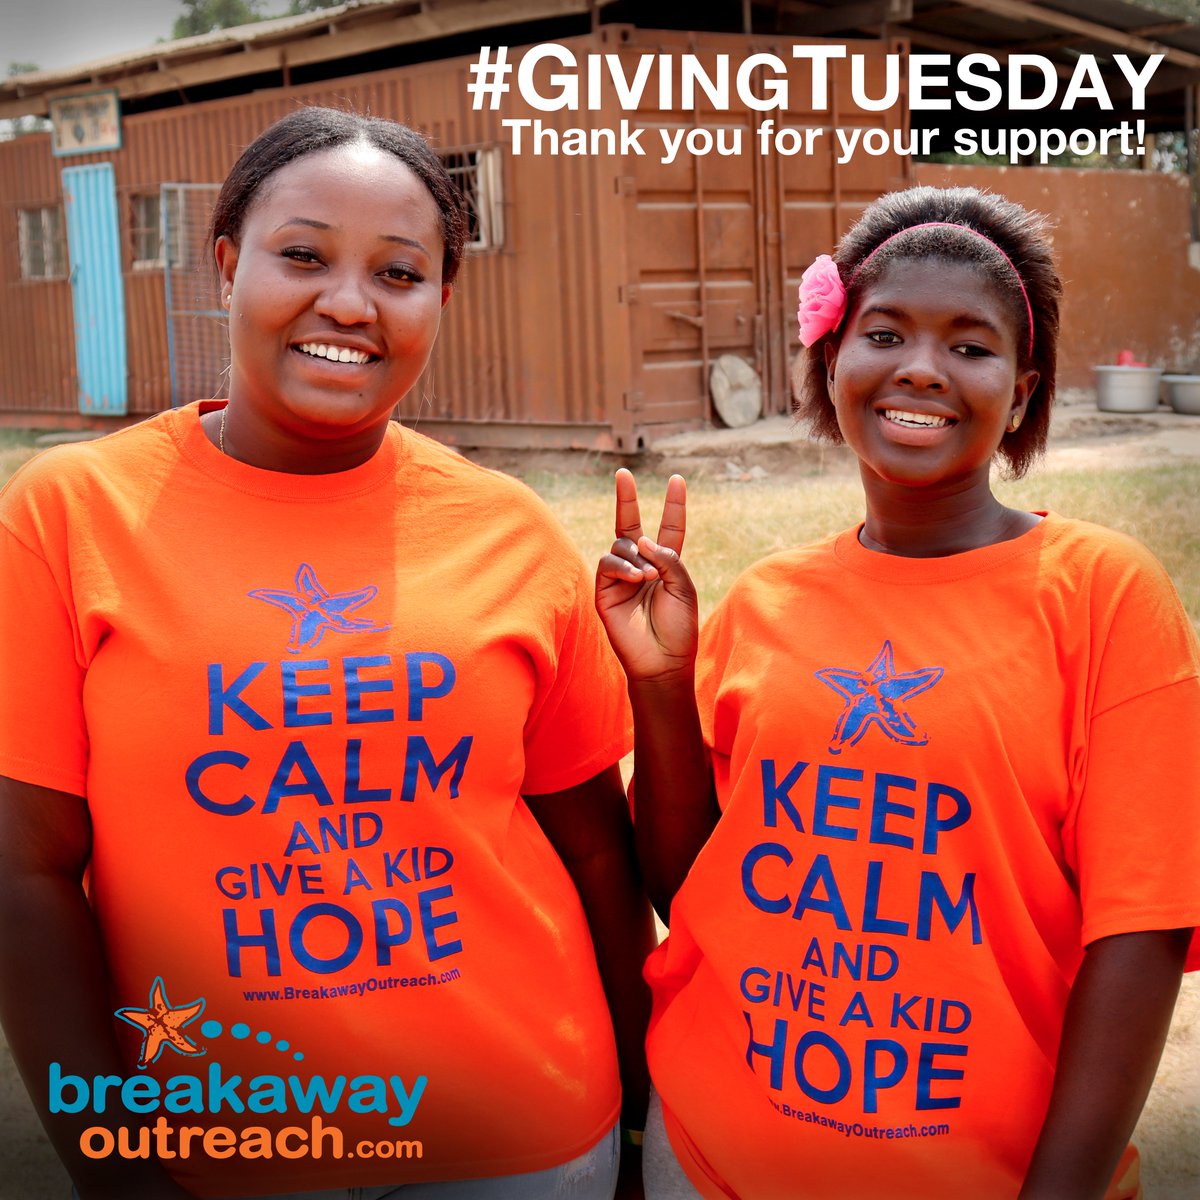 Thank you for considering Breakaway Outreach for your #GivingTuesday contributions. 

breakawayoutreach.com/donate/